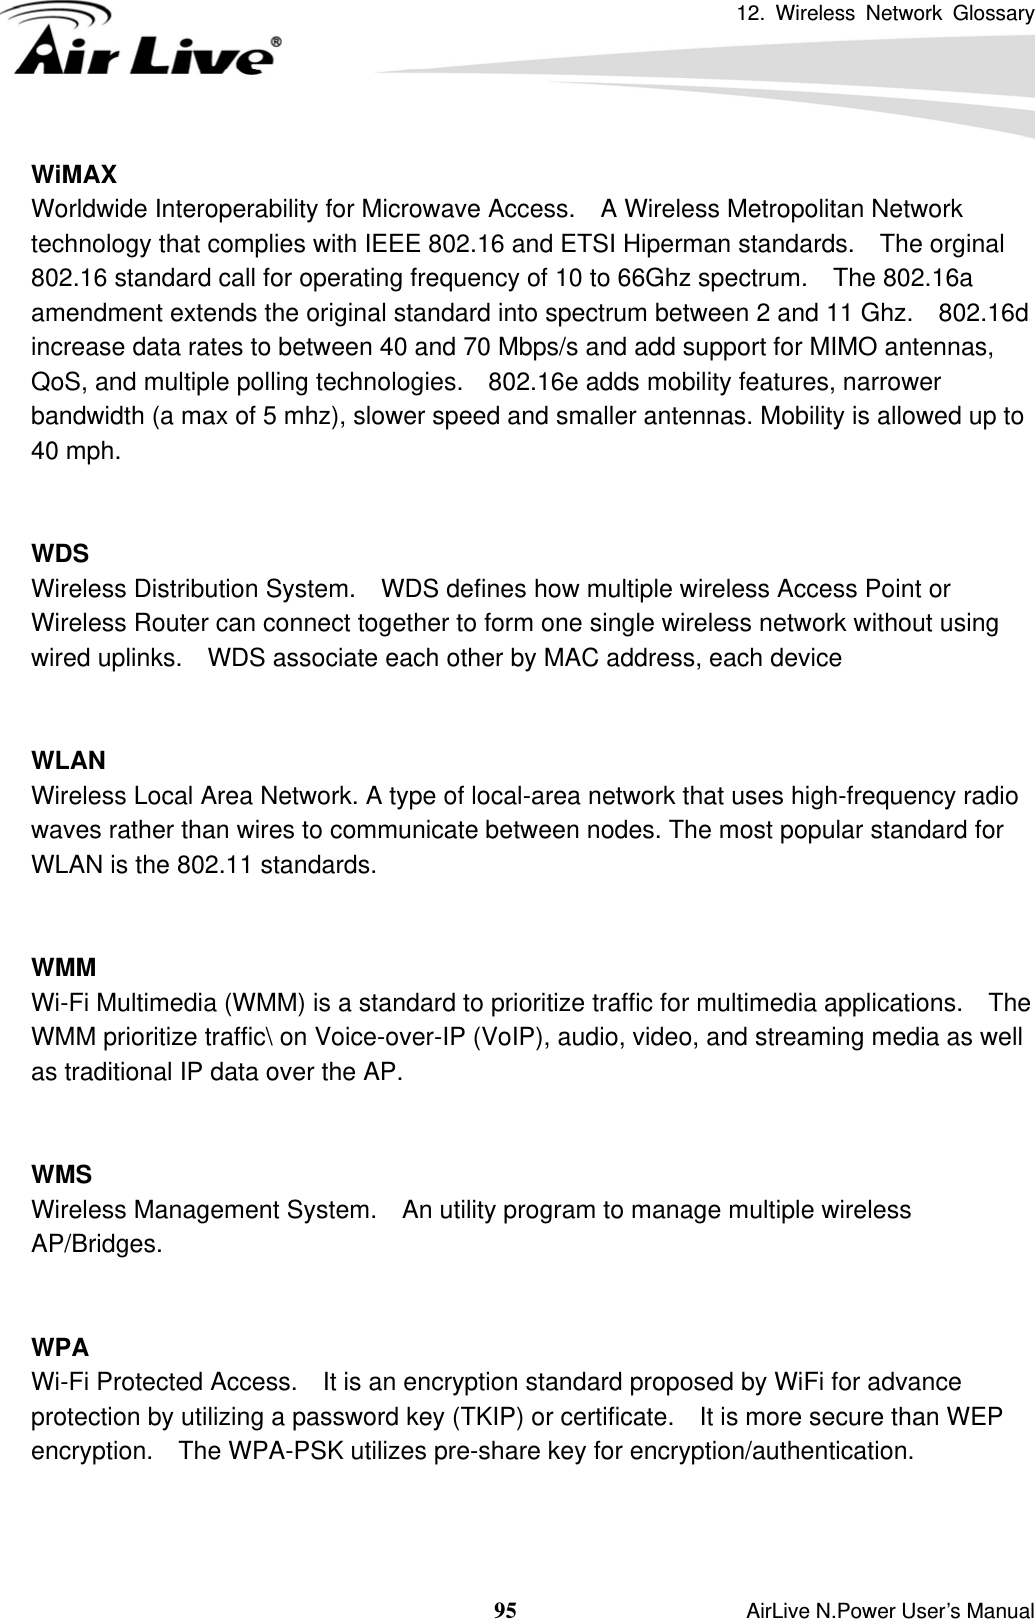 12. Wireless Network Glossary  95                    AirLive N.Power User’s Manual WiMAX Worldwide Interoperability for Microwave Access.    A Wireless Metropolitan Network technology that complies with IEEE 802.16 and ETSI Hiperman standards.    The orginal 802.16 standard call for operating frequency of 10 to 66Ghz spectrum.    The 802.16a amendment extends the original standard into spectrum between 2 and 11 Ghz.    802.16d increase data rates to between 40 and 70 Mbps/s and add support for MIMO antennas, QoS, and multiple polling technologies.    802.16e adds mobility features, narrower bandwidth (a max of 5 mhz), slower speed and smaller antennas. Mobility is allowed up to 40 mph.     WDS Wireless Distribution System.    WDS defines how multiple wireless Access Point or Wireless Router can connect together to form one single wireless network without using wired uplinks.    WDS associate each other by MAC address, each device     WLAN Wireless Local Area Network. A type of local-area network that uses high-frequency radio waves rather than wires to communicate between nodes. The most popular standard for WLAN is the 802.11 standards.   WMM Wi-Fi Multimedia (WMM) is a standard to prioritize traffic for multimedia applications.    The WMM prioritize traffic\ on Voice-over-IP (VoIP), audio, video, and streaming media as well as traditional IP data over the AP.   WMS Wireless Management System.    An utility program to manage multiple wireless AP/Bridges.   WPA Wi-Fi Protected Access.    It is an encryption standard proposed by WiFi for advance protection by utilizing a password key (TKIP) or certificate.  It is more secure than WEP encryption.    The WPA-PSK utilizes pre-share key for encryption/authentication.      